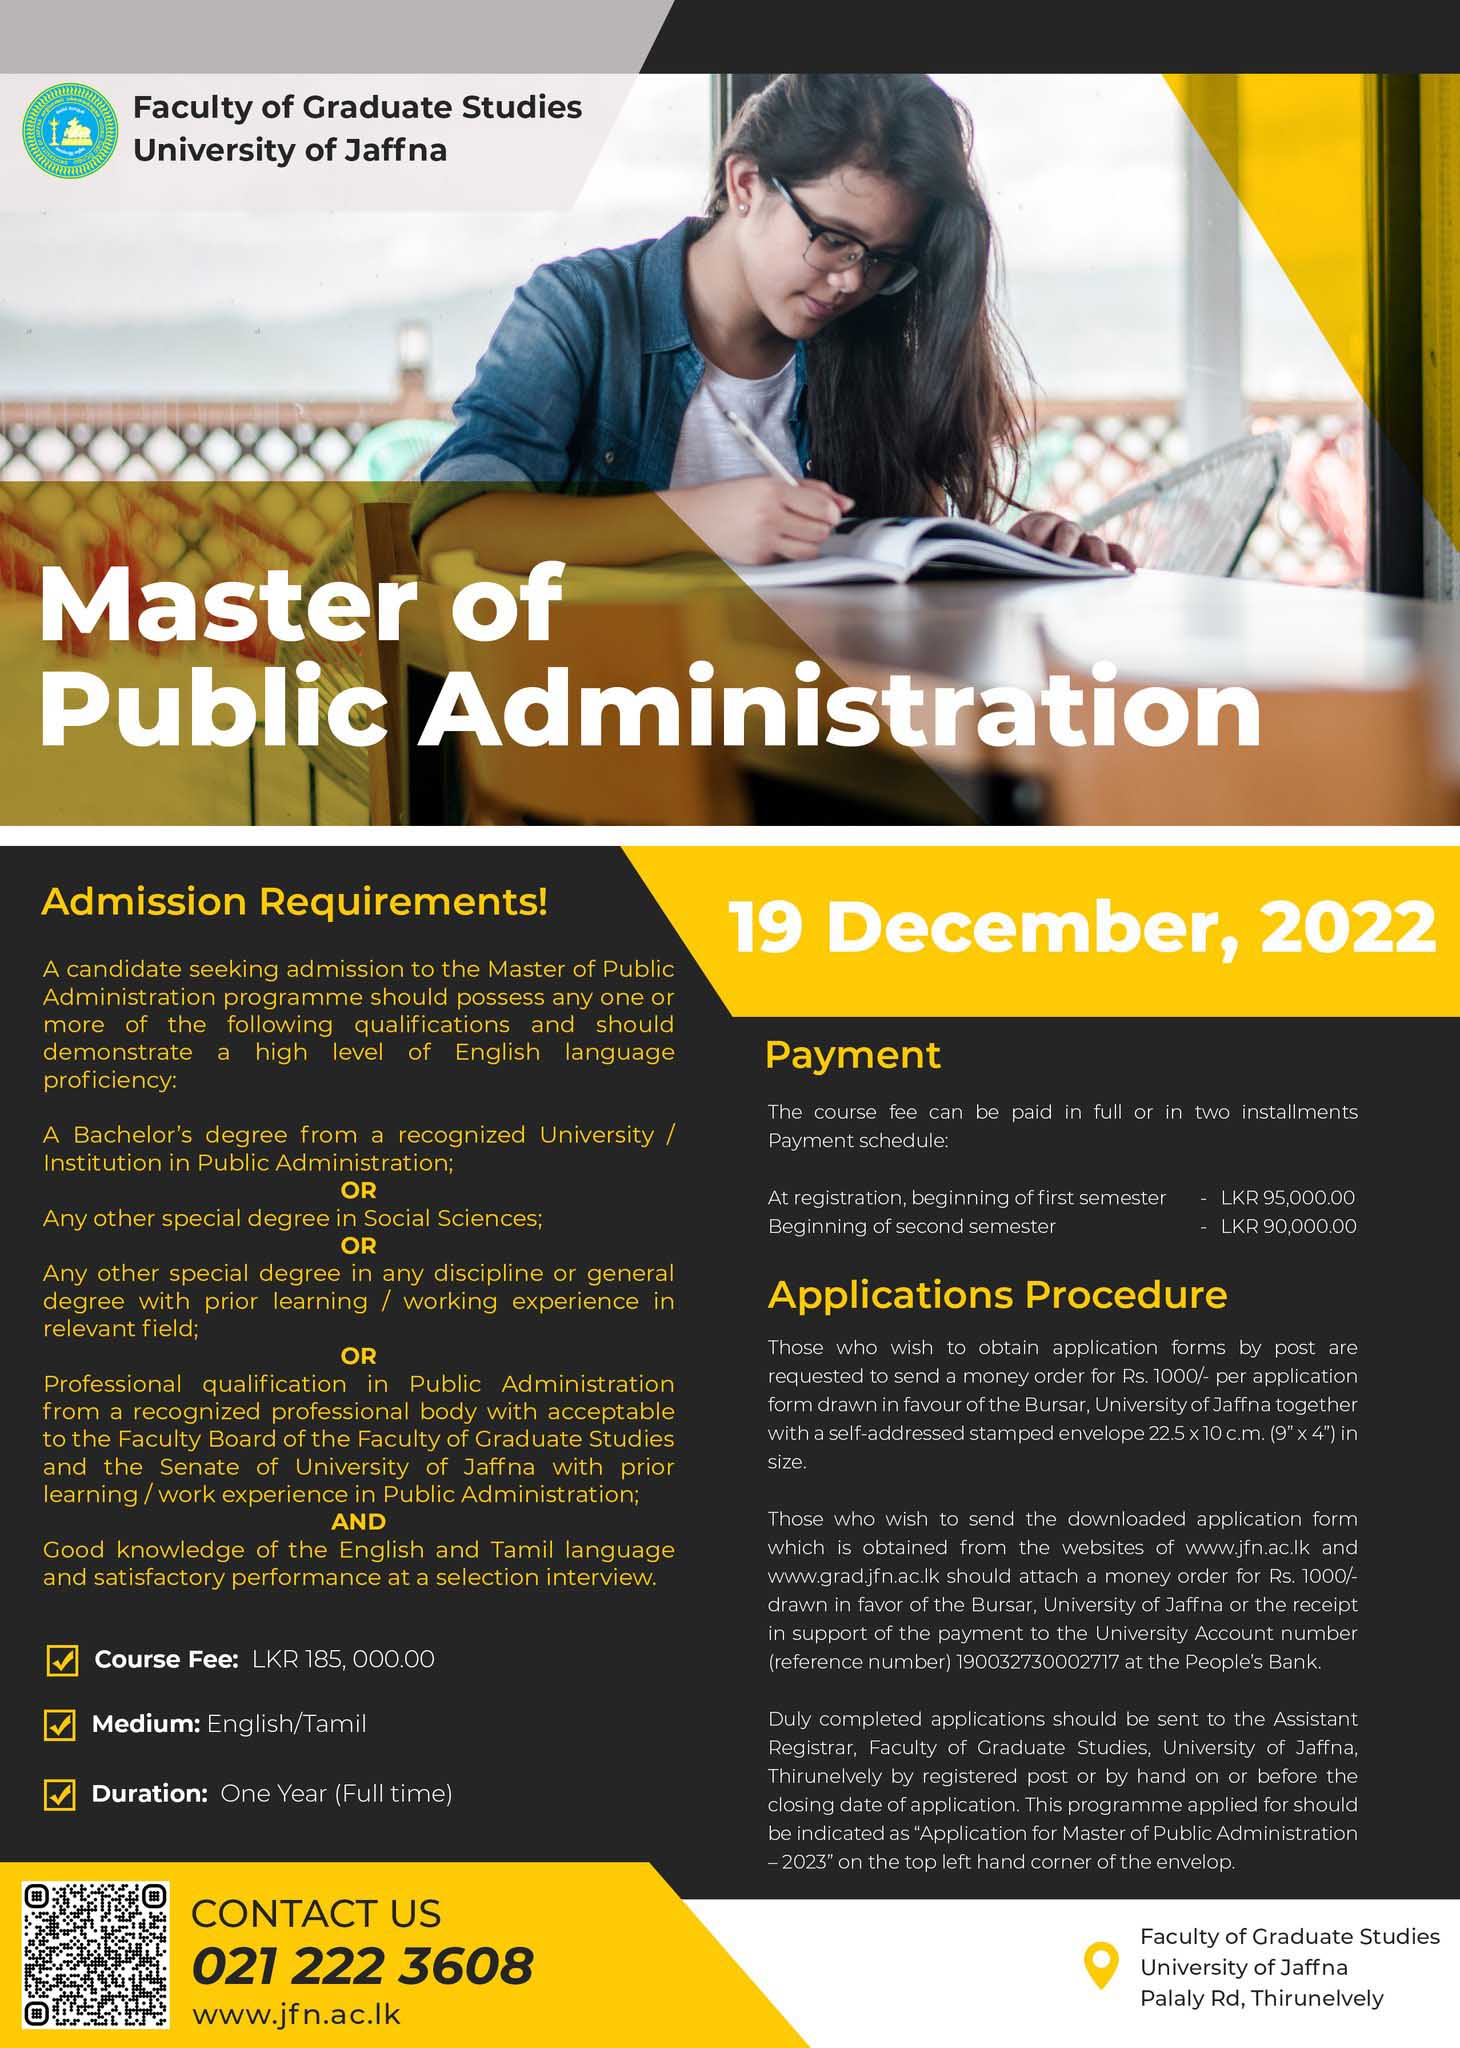 Call for Applications - Master of Public Administration 2022/2023 from the Faculty of Graduates Studies, University of Jaffna